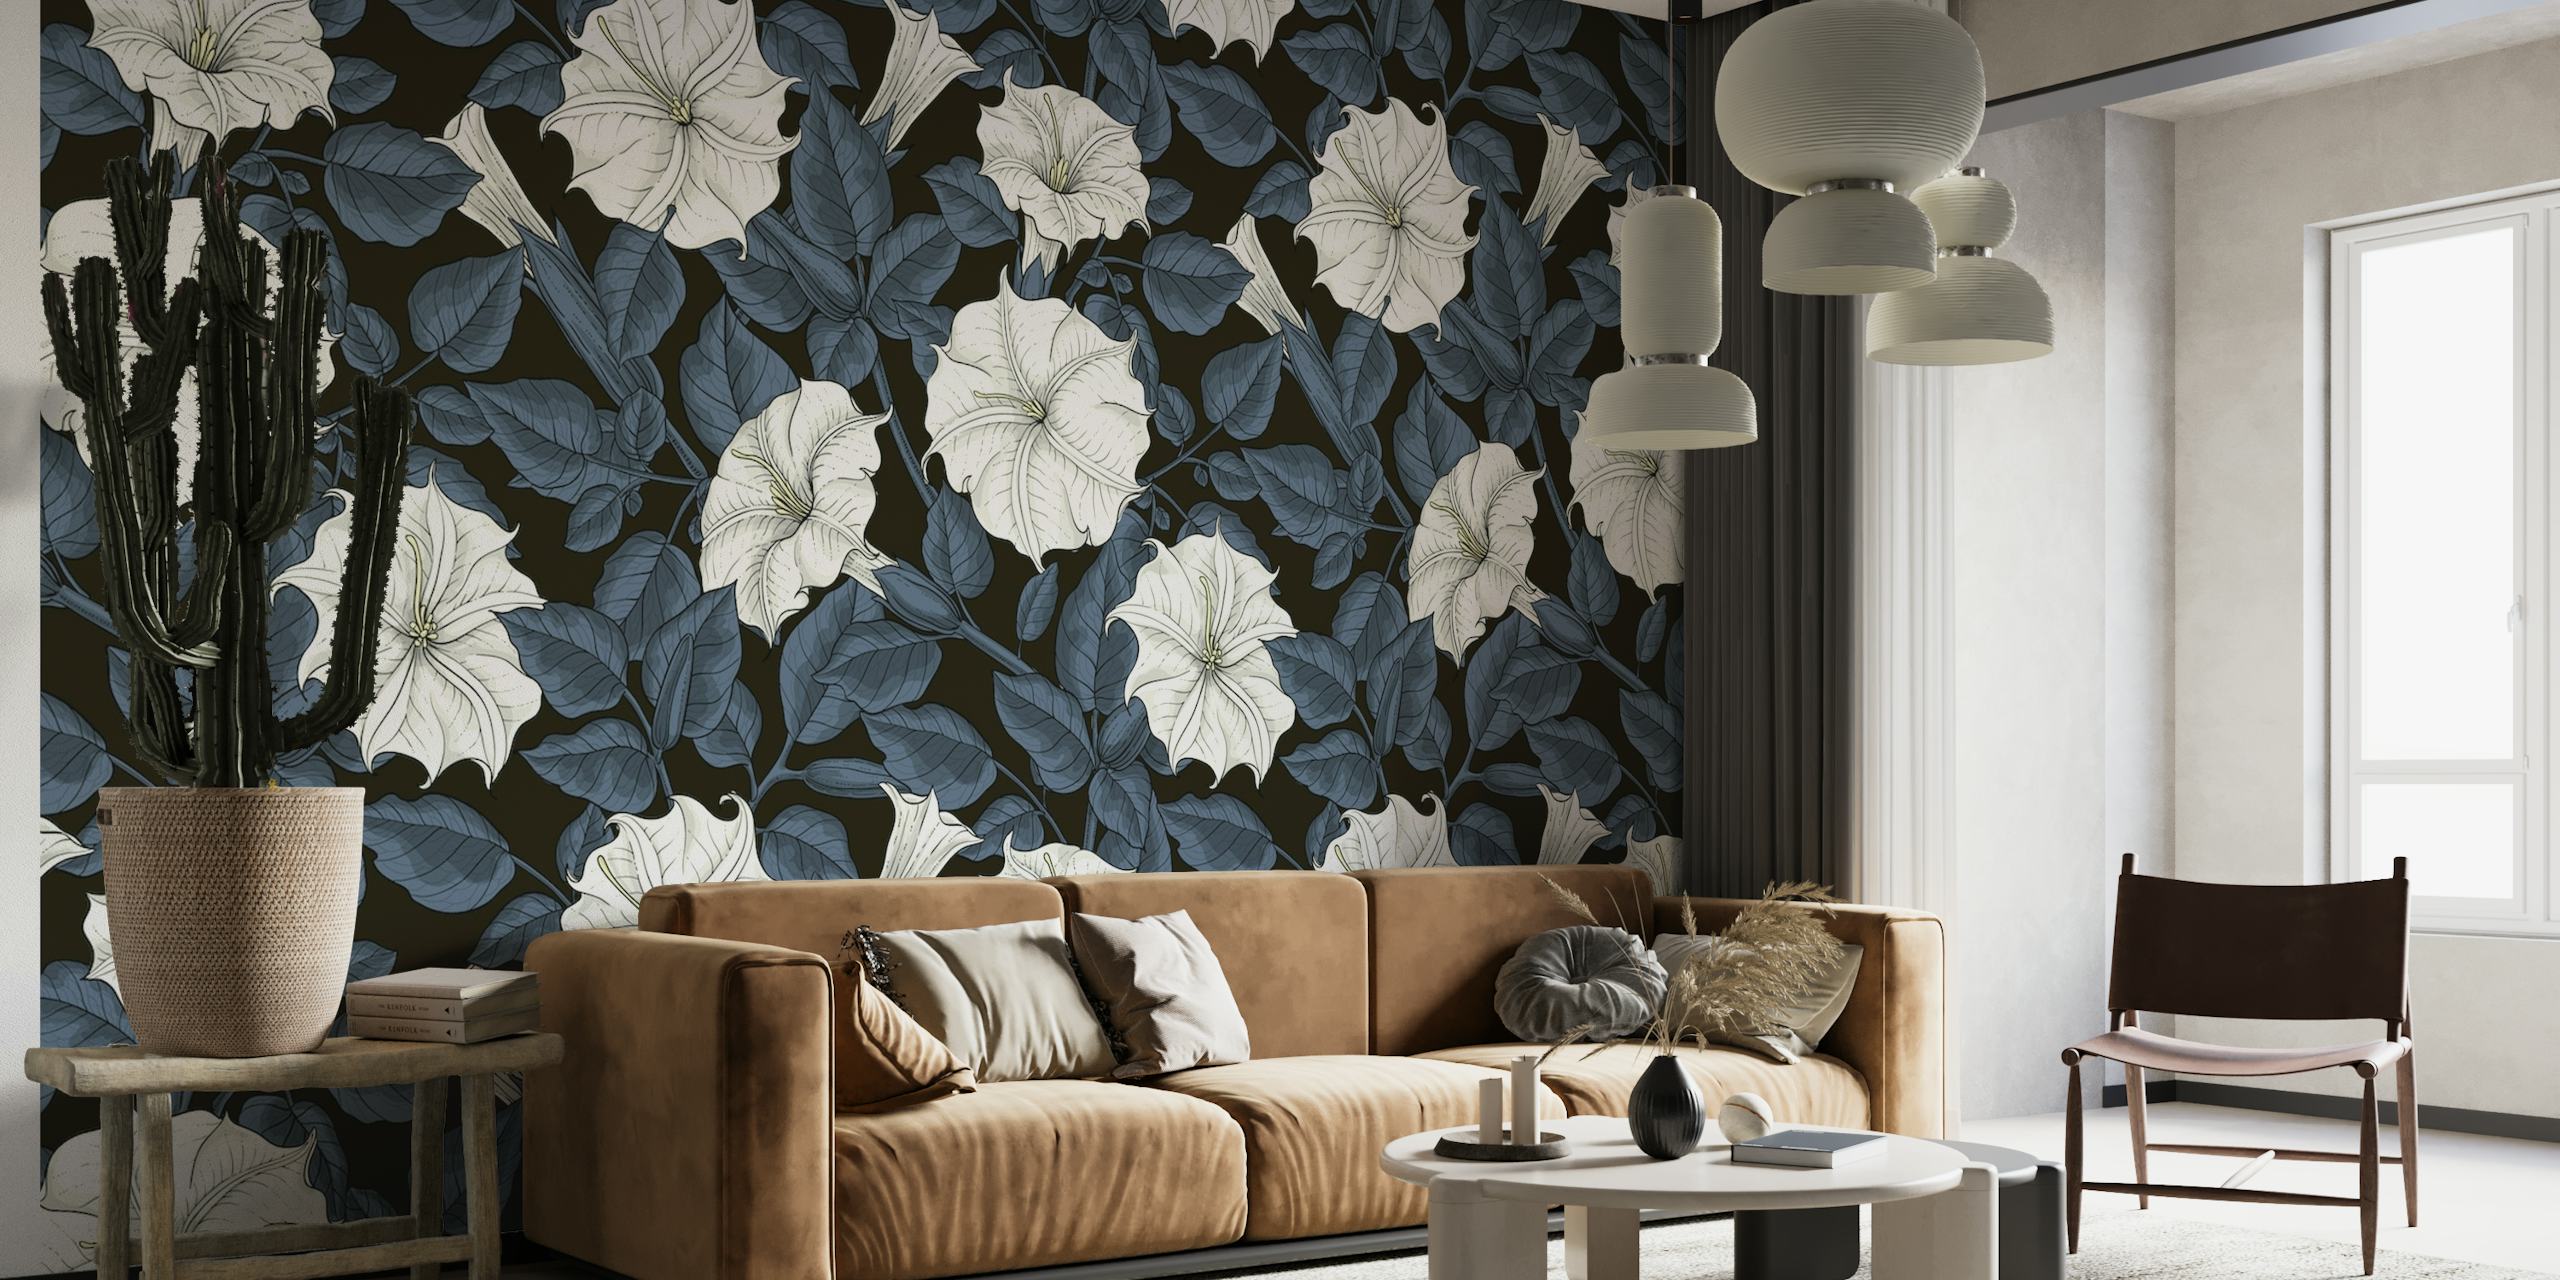 A wall mural with white moonflowers on a dark background, creating a striking contrast.